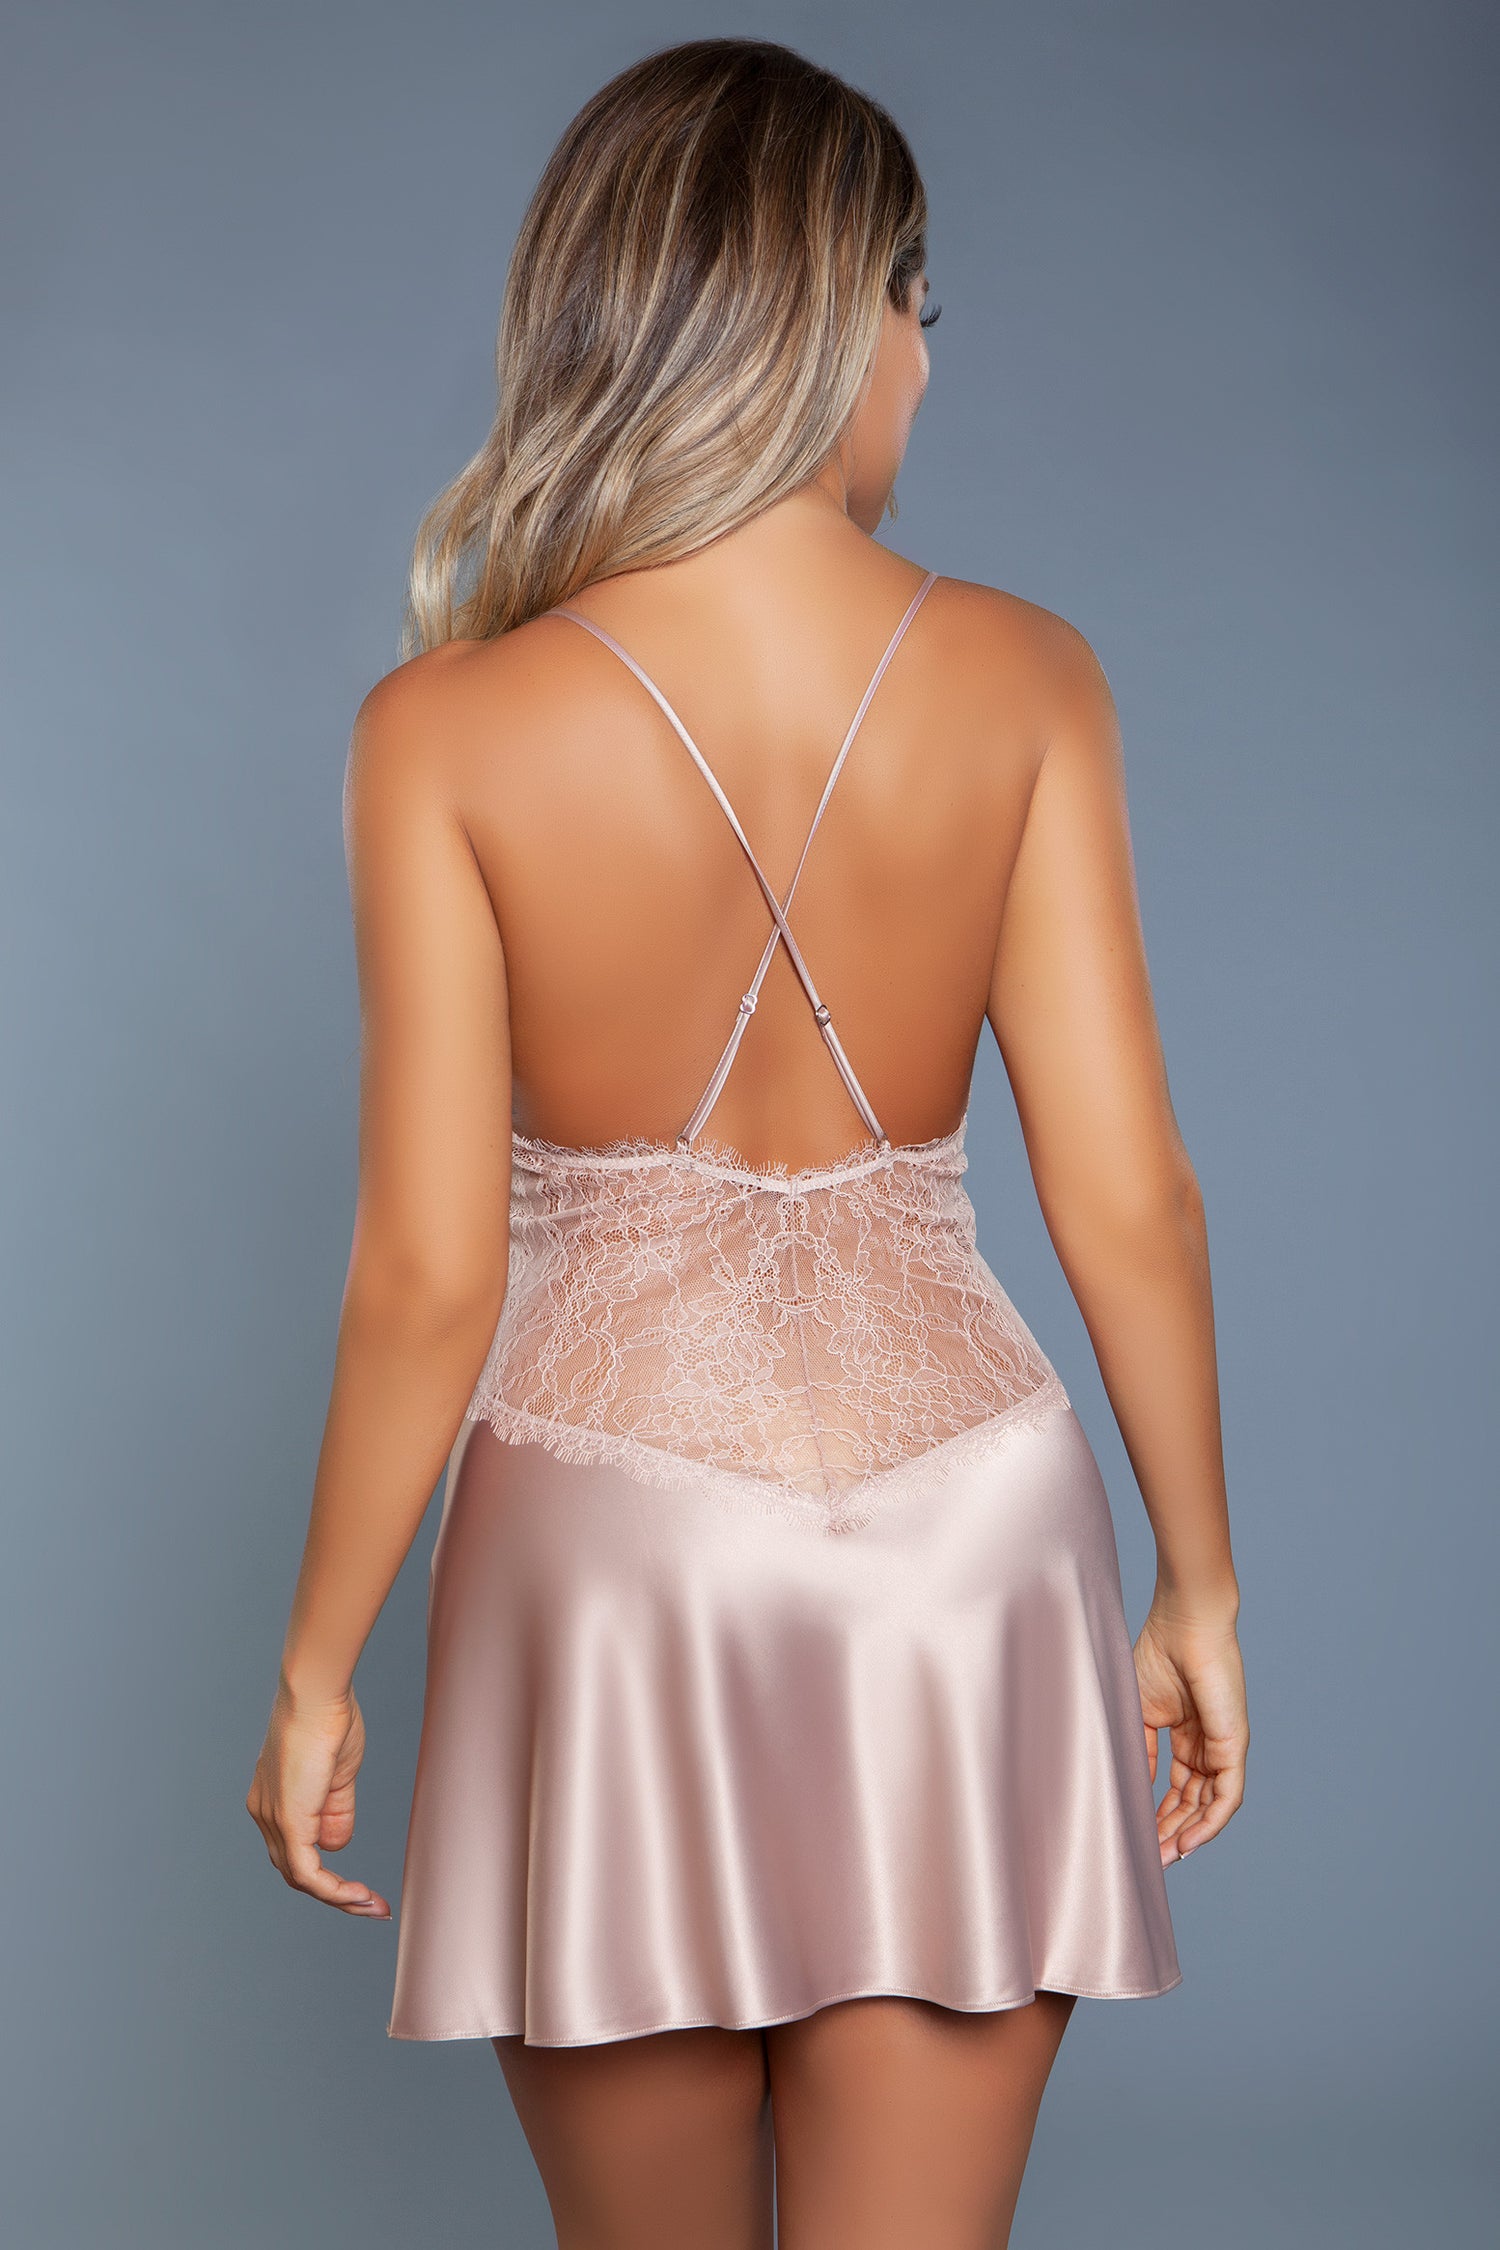 Next To You Lace And Satin Slip